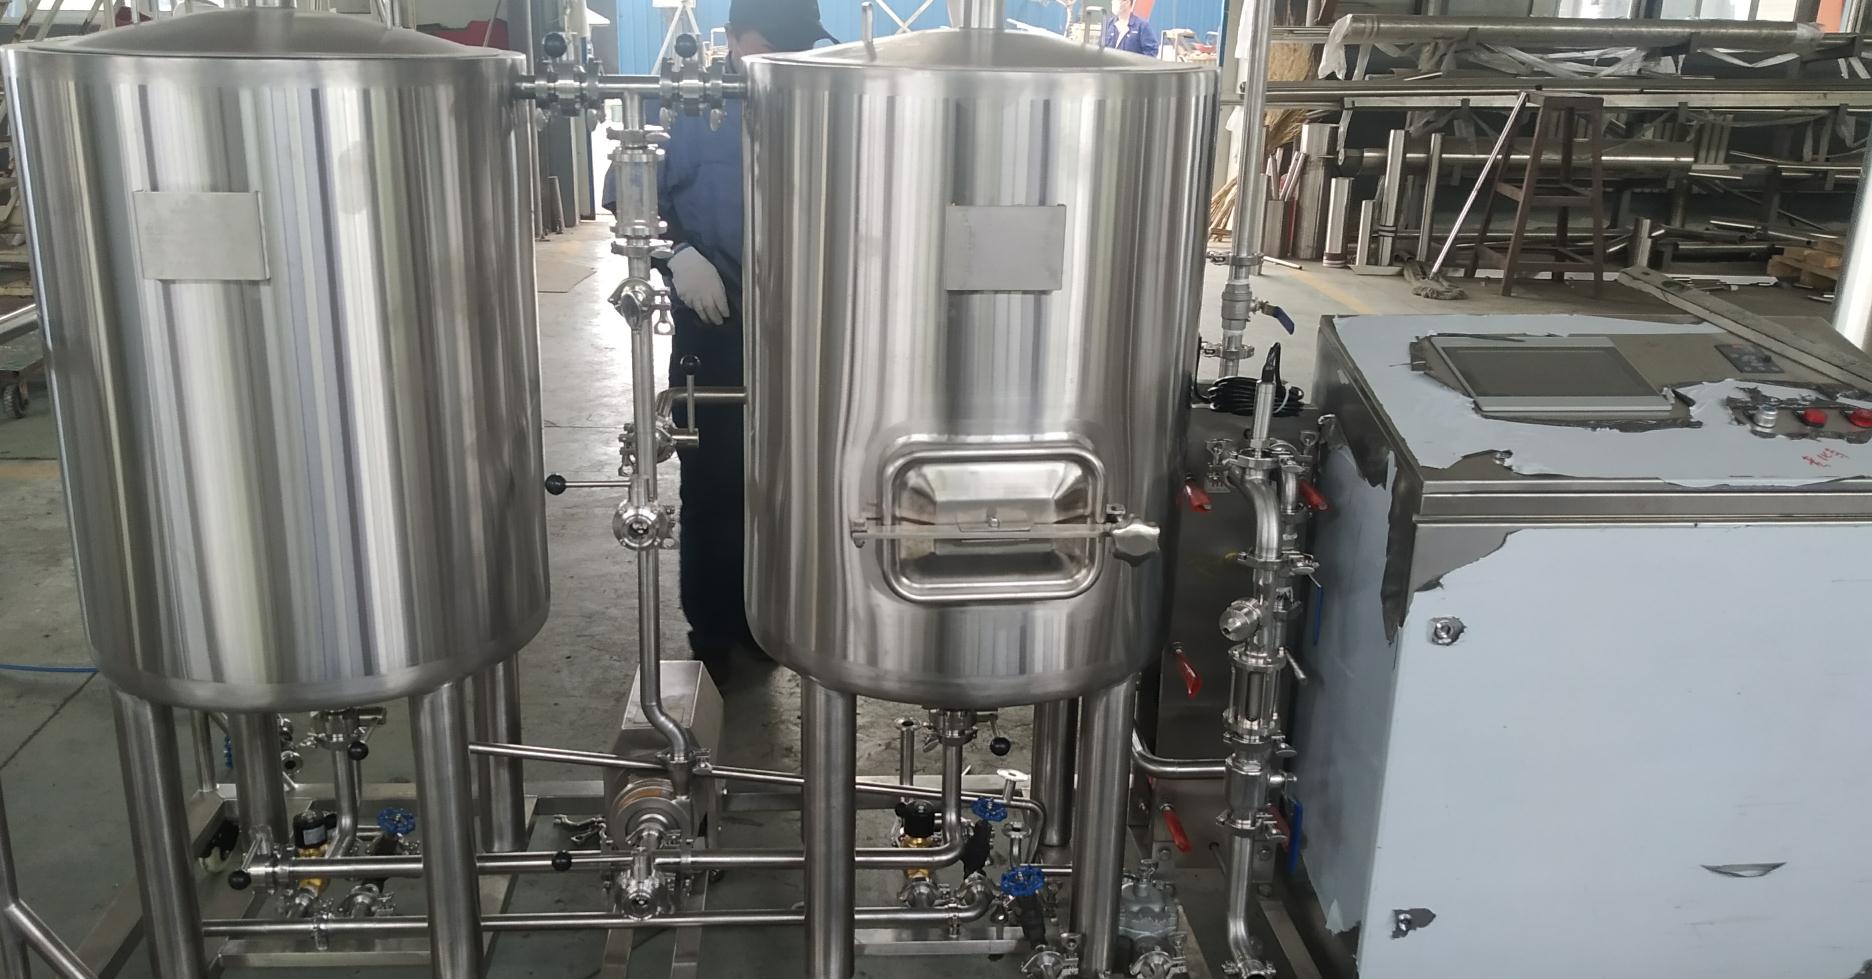 China manufacturer professional craft beer brewing equipment of sus304 to Singapore 2020 W1